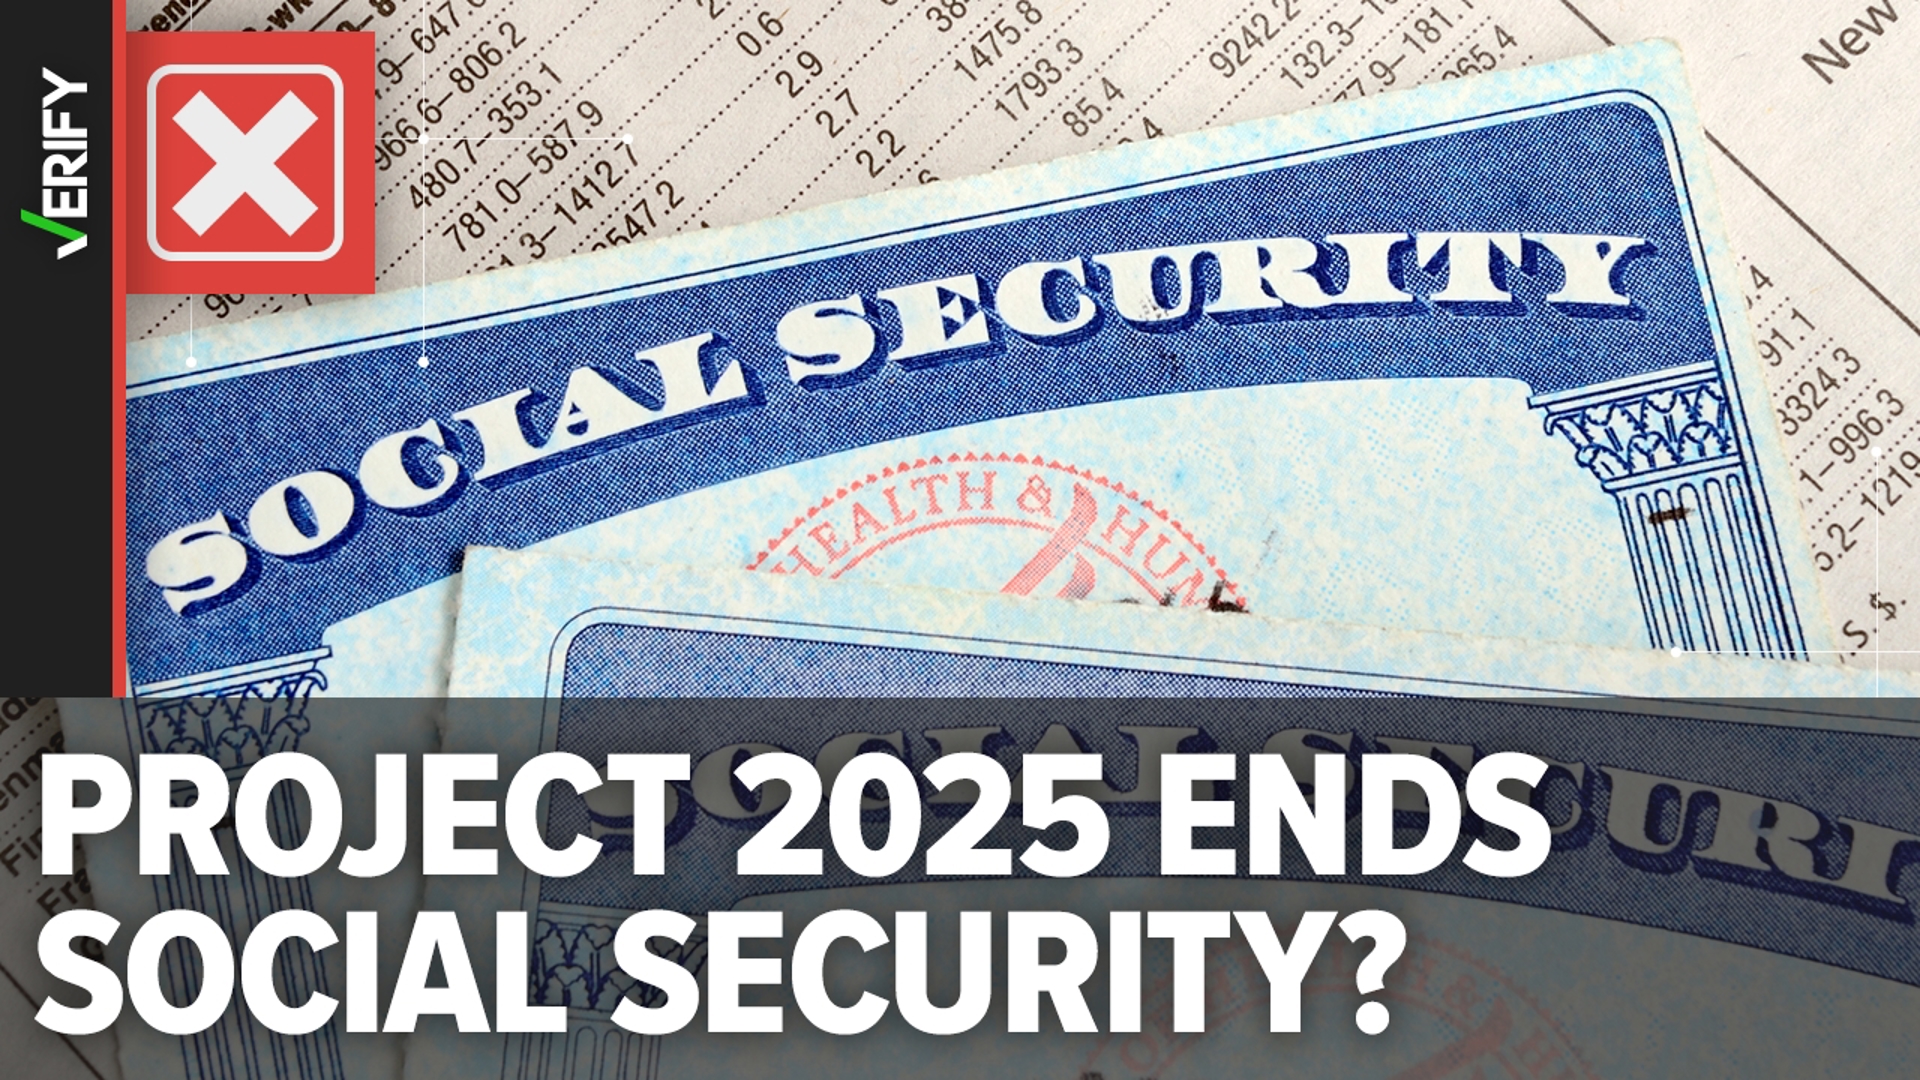 Project 2025 doesn’t propose ending Social Security retirement and disability benefits. But the Heritage Foundation has proposed some changes to the program.